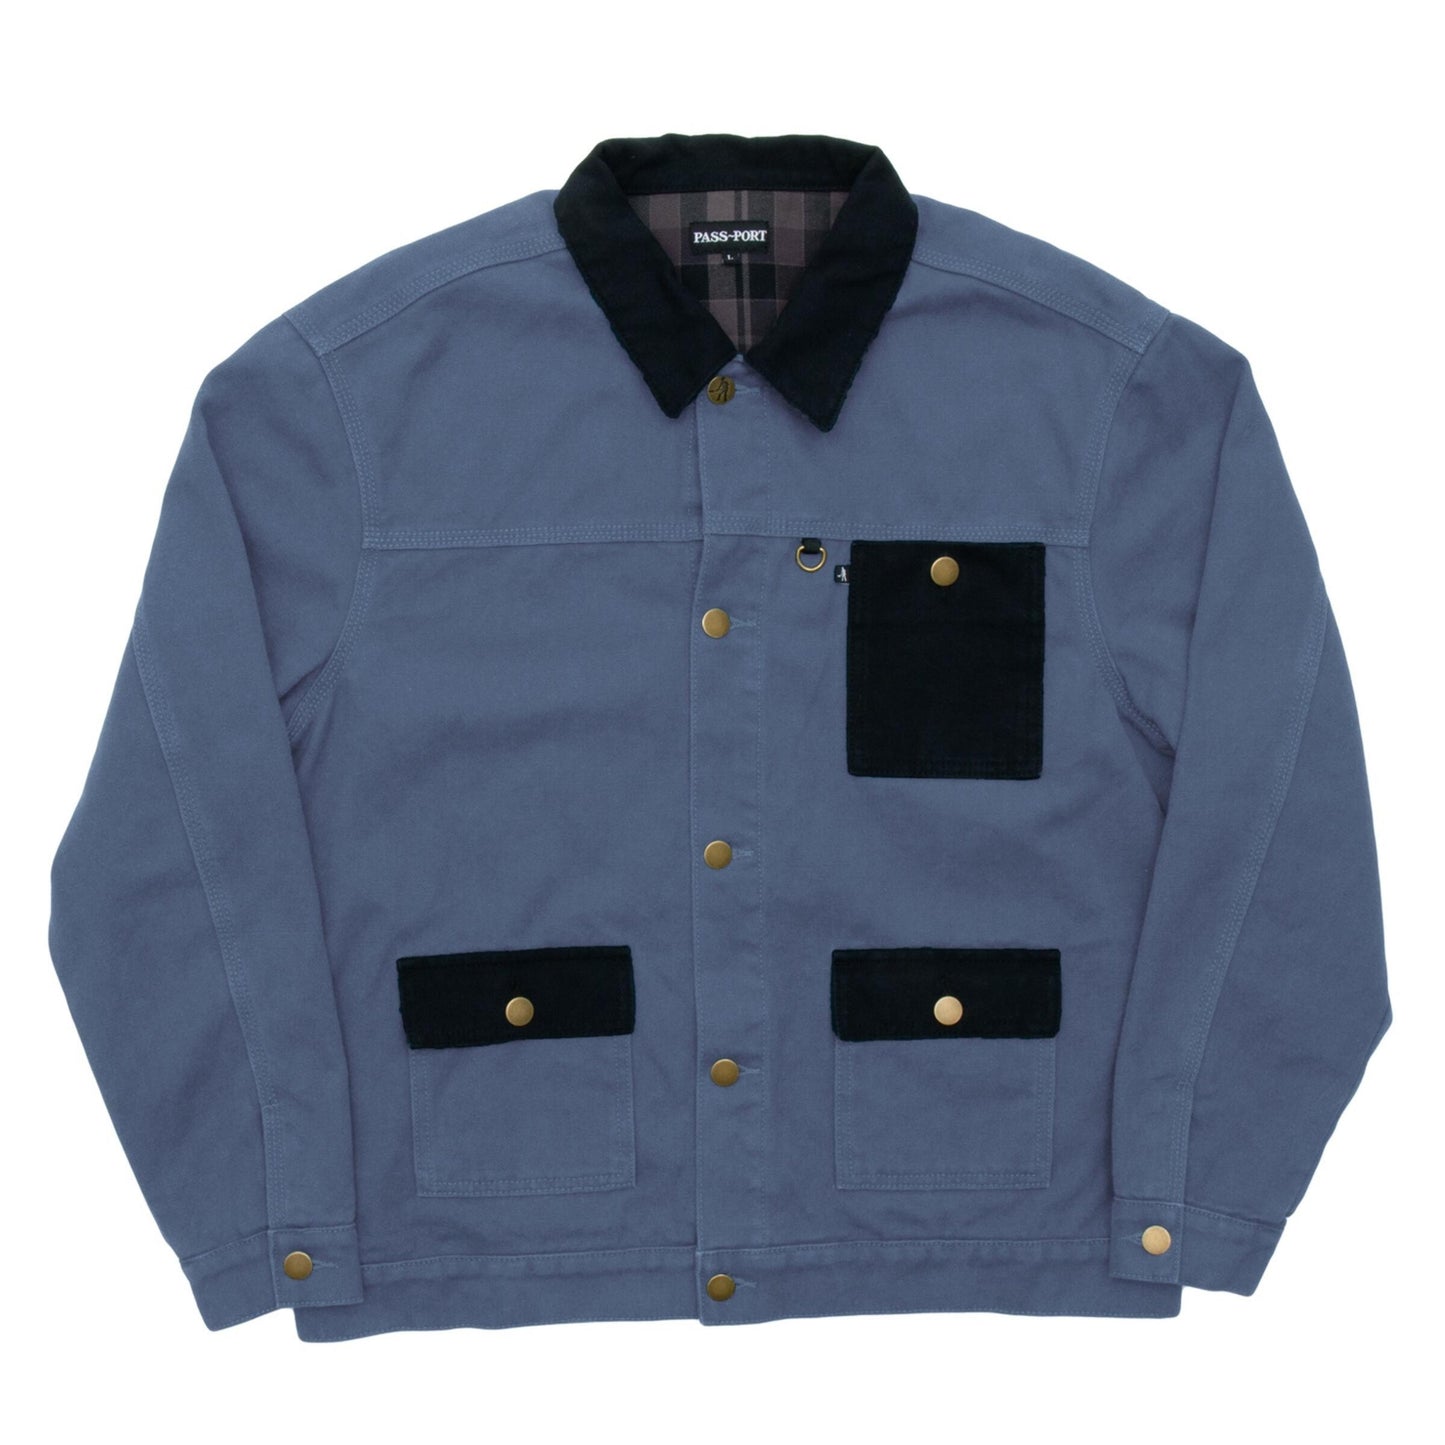 Pass-Port Workers Late Jacket Navy